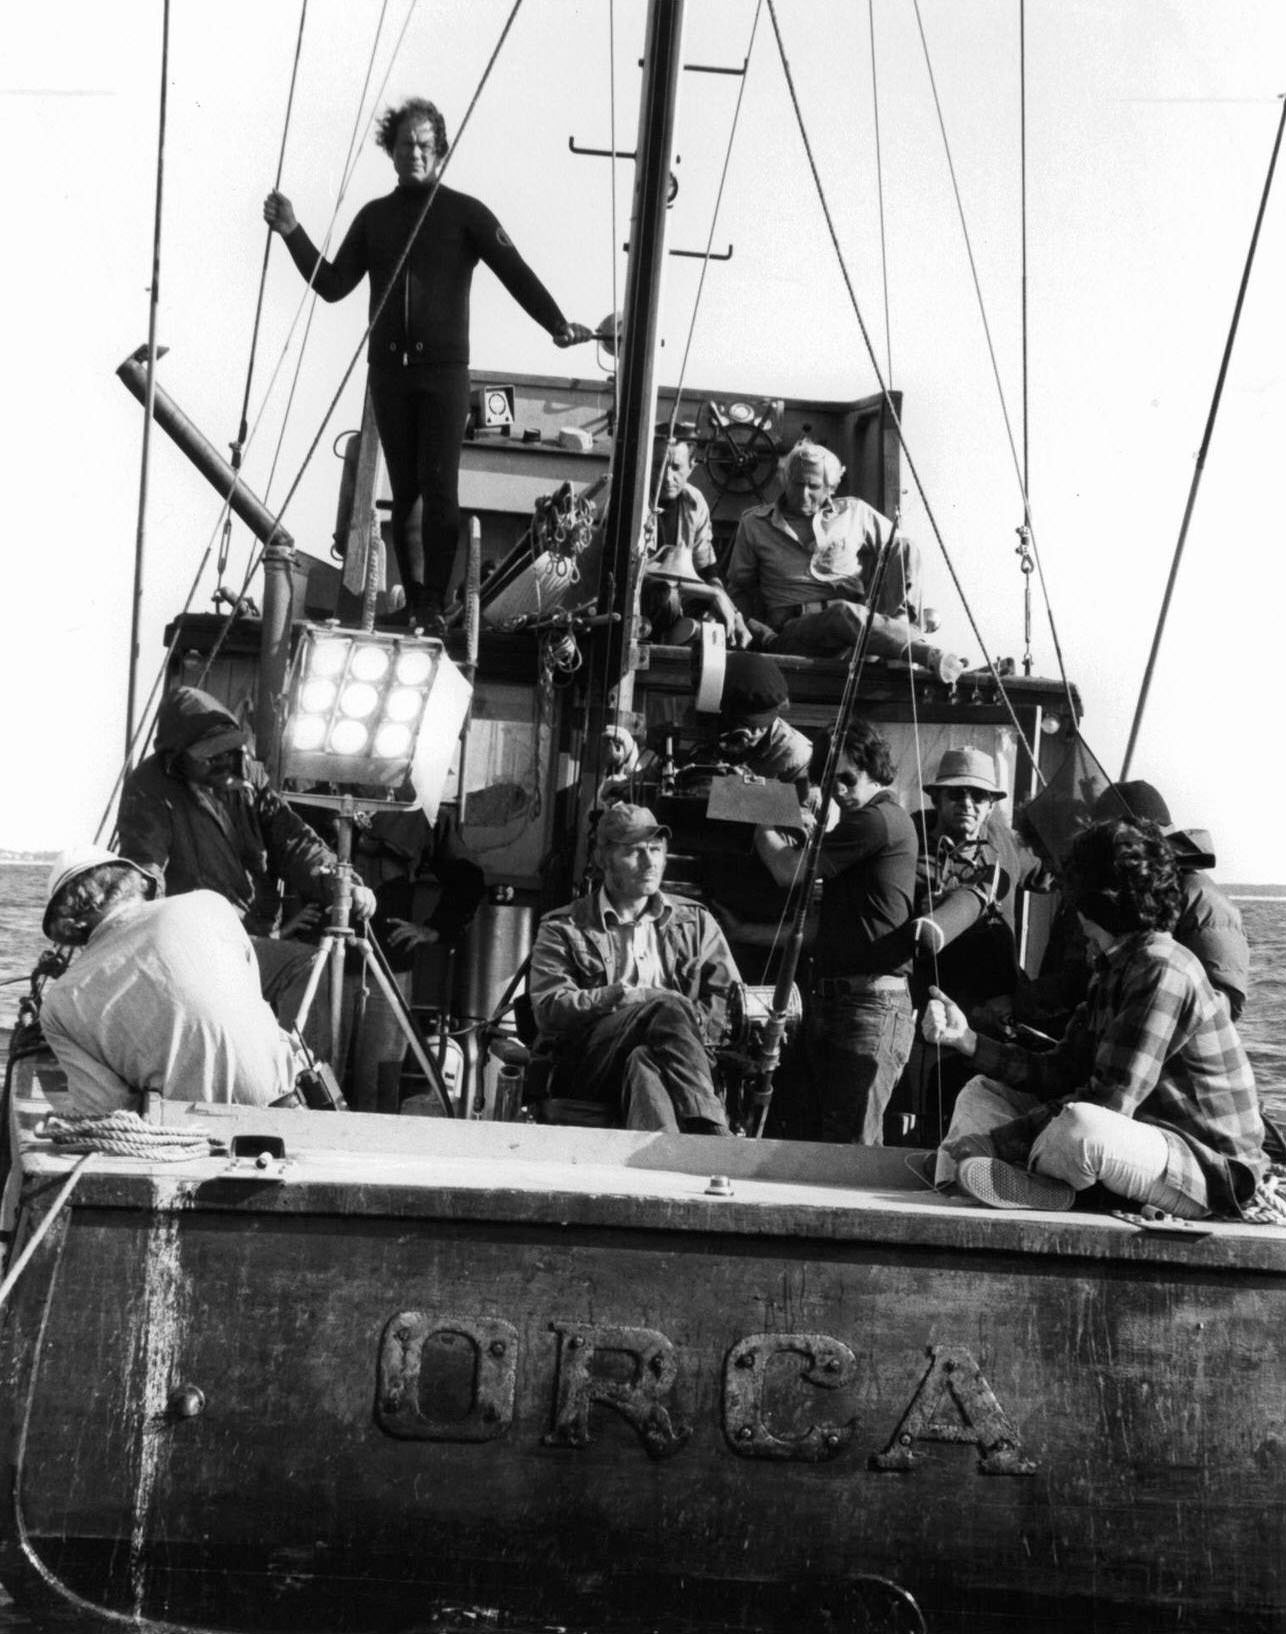 Roy Scheider on top deck as crew set up to film a scene from the film 'Jaws', 1975.